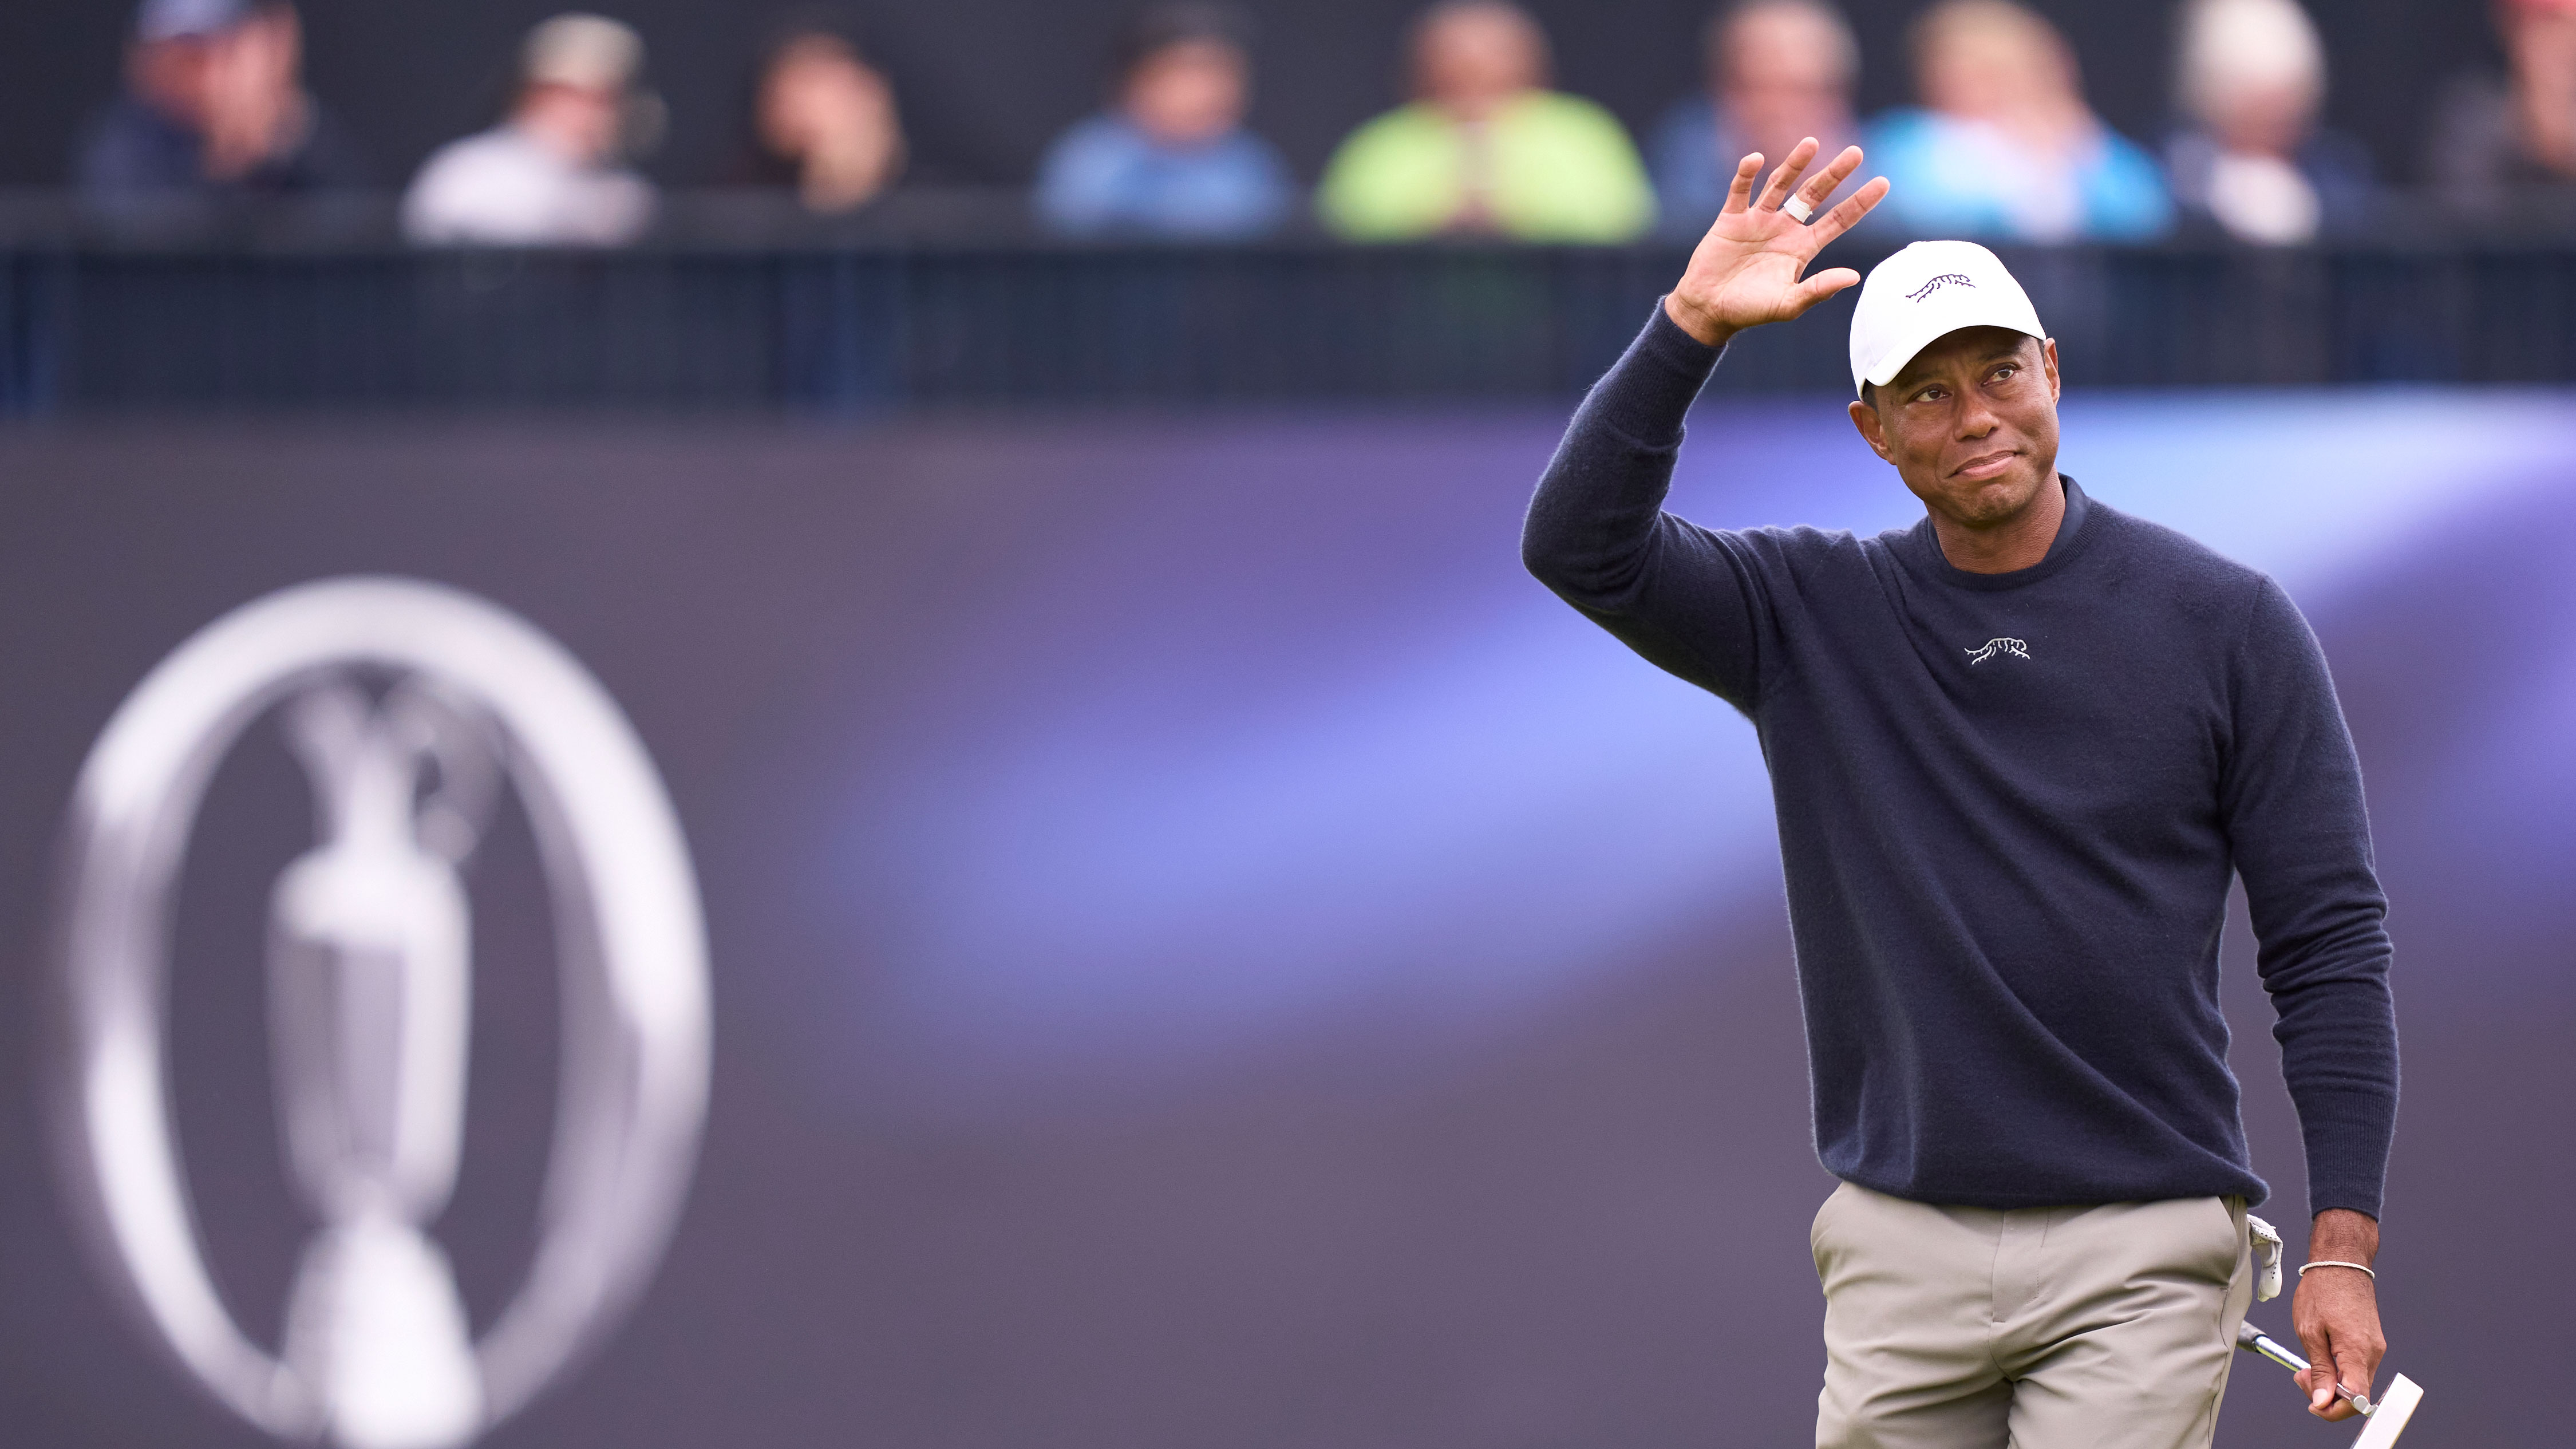 Tiger Woods misses British Open cut to end his season